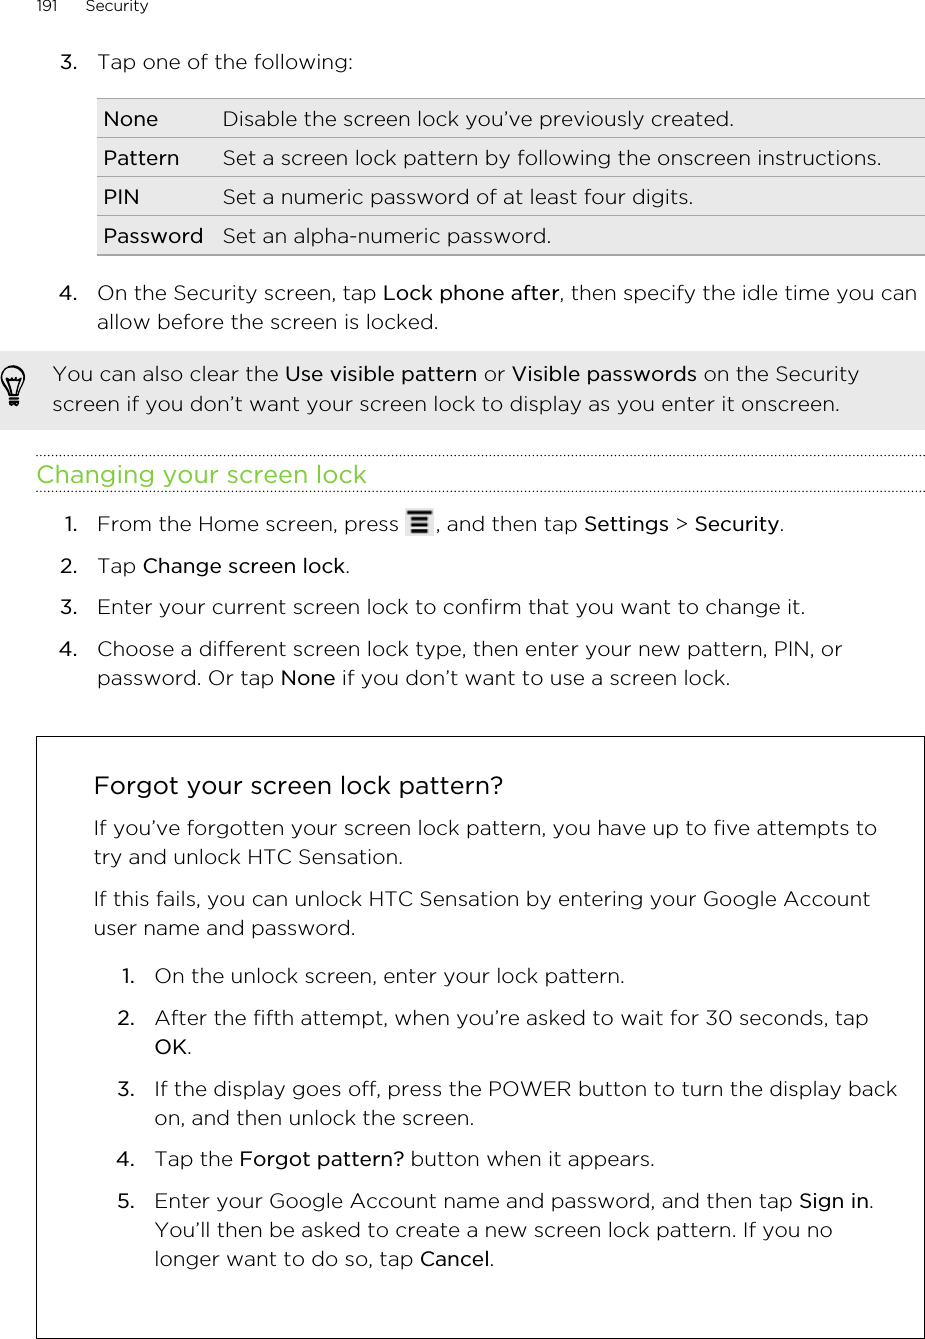 3. Tap one of the following:None Disable the screen lock you’ve previously created.Pattern Set a screen lock pattern by following the onscreen instructions.PIN Set a numeric password of at least four digits.Password Set an alpha-numeric password.4. On the Security screen, tap Lock phone after, then specify the idle time you canallow before the screen is locked. You can also clear the Use visible pattern or Visible passwords on the Securityscreen if you don’t want your screen lock to display as you enter it onscreen.Changing your screen lock1. From the Home screen, press  , and then tap Settings &gt; Security.2. Tap Change screen lock.3. Enter your current screen lock to confirm that you want to change it.4. Choose a different screen lock type, then enter your new pattern, PIN, orpassword. Or tap None if you don’t want to use a screen lock.Forgot your screen lock pattern?If you’ve forgotten your screen lock pattern, you have up to five attempts totry and unlock HTC Sensation.If this fails, you can unlock HTC Sensation by entering your Google Accountuser name and password.1. On the unlock screen, enter your lock pattern.2. After the fifth attempt, when you’re asked to wait for 30 seconds, tapOK.3. If the display goes off, press the POWER button to turn the display backon, and then unlock the screen.4. Tap the Forgot pattern? button when it appears.5. Enter your Google Account name and password, and then tap Sign in.You’ll then be asked to create a new screen lock pattern. If you nolonger want to do so, tap Cancel.191 Security